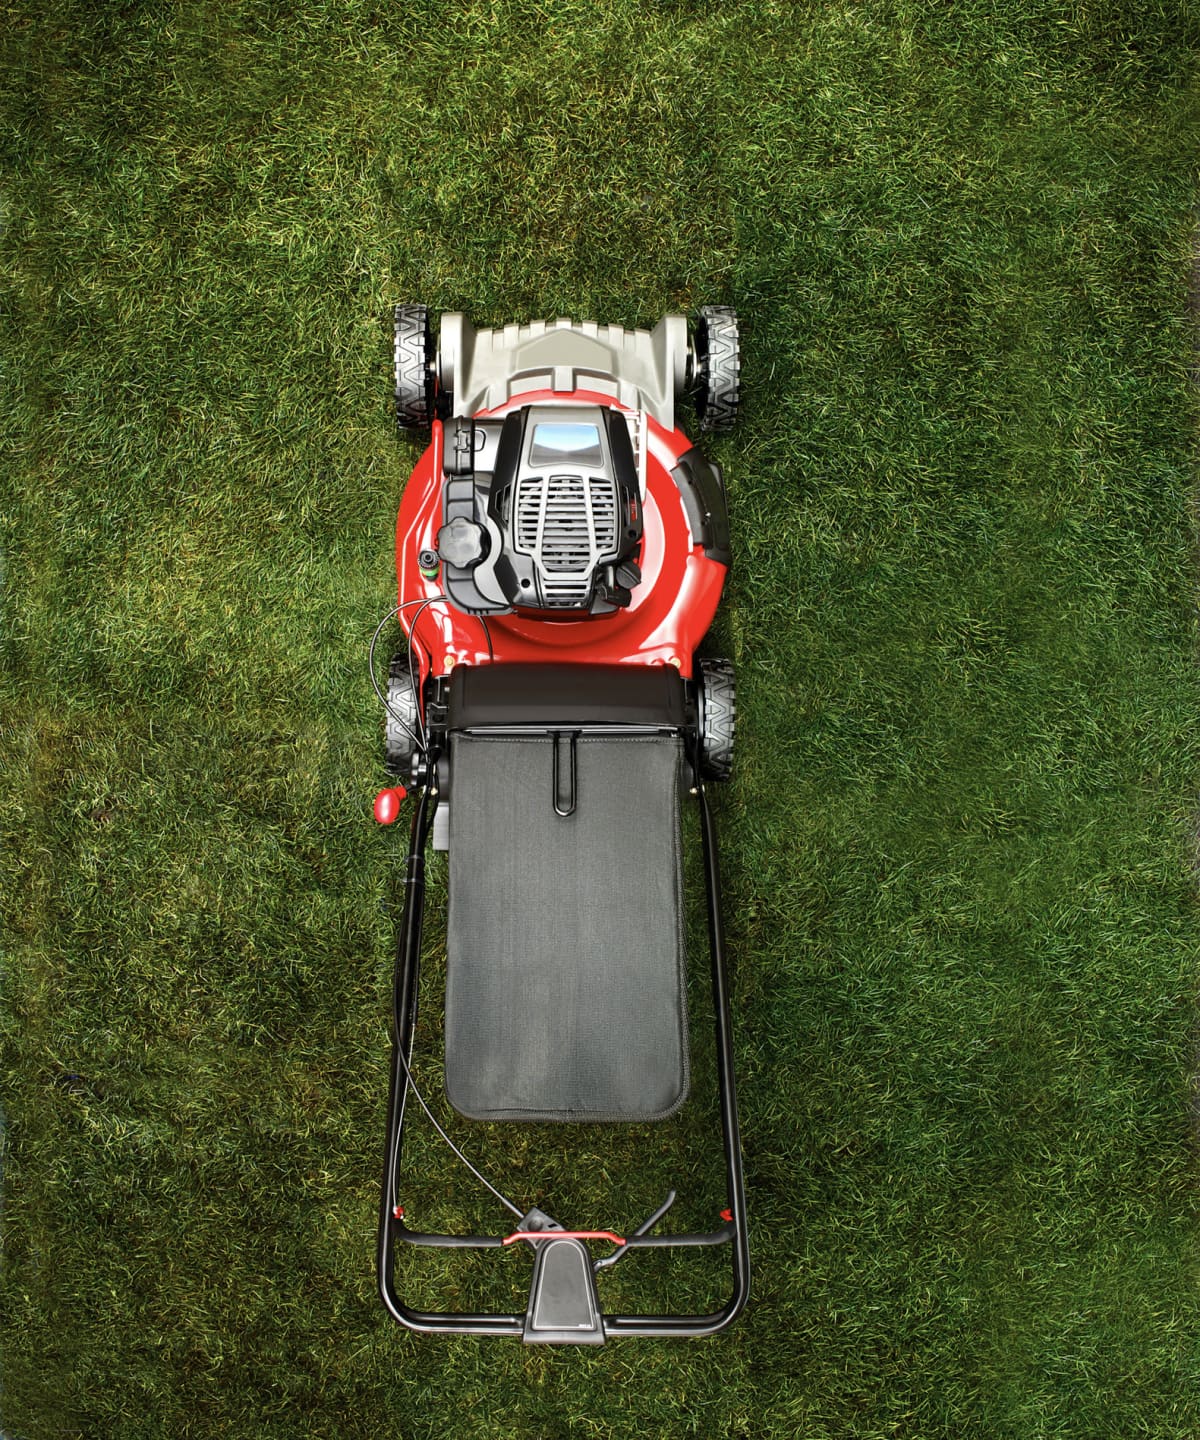 A sparkling clean lawnmower on a lush green lawn